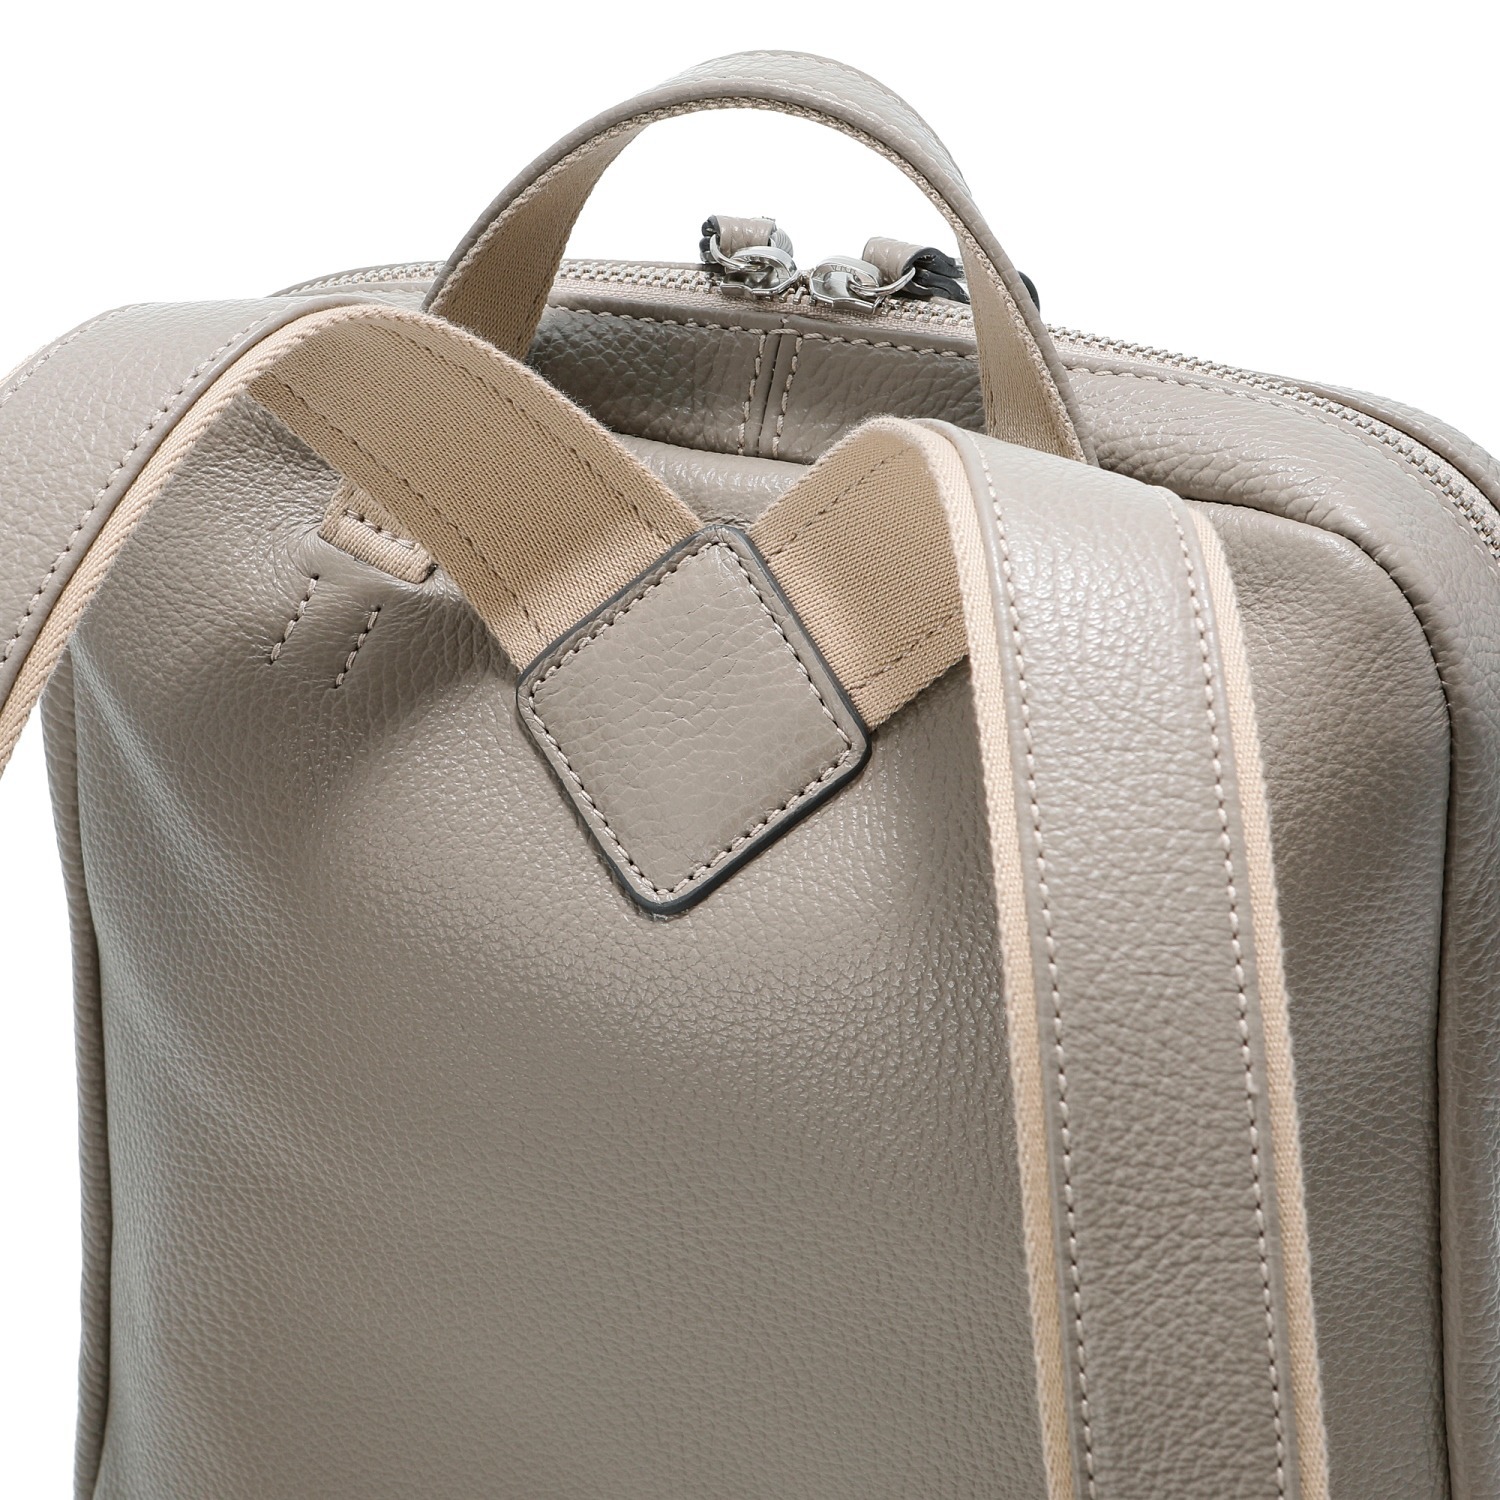 ZZ BACKPACK.27.1 ALCE accopiato 詳細画像 TAUPE 7